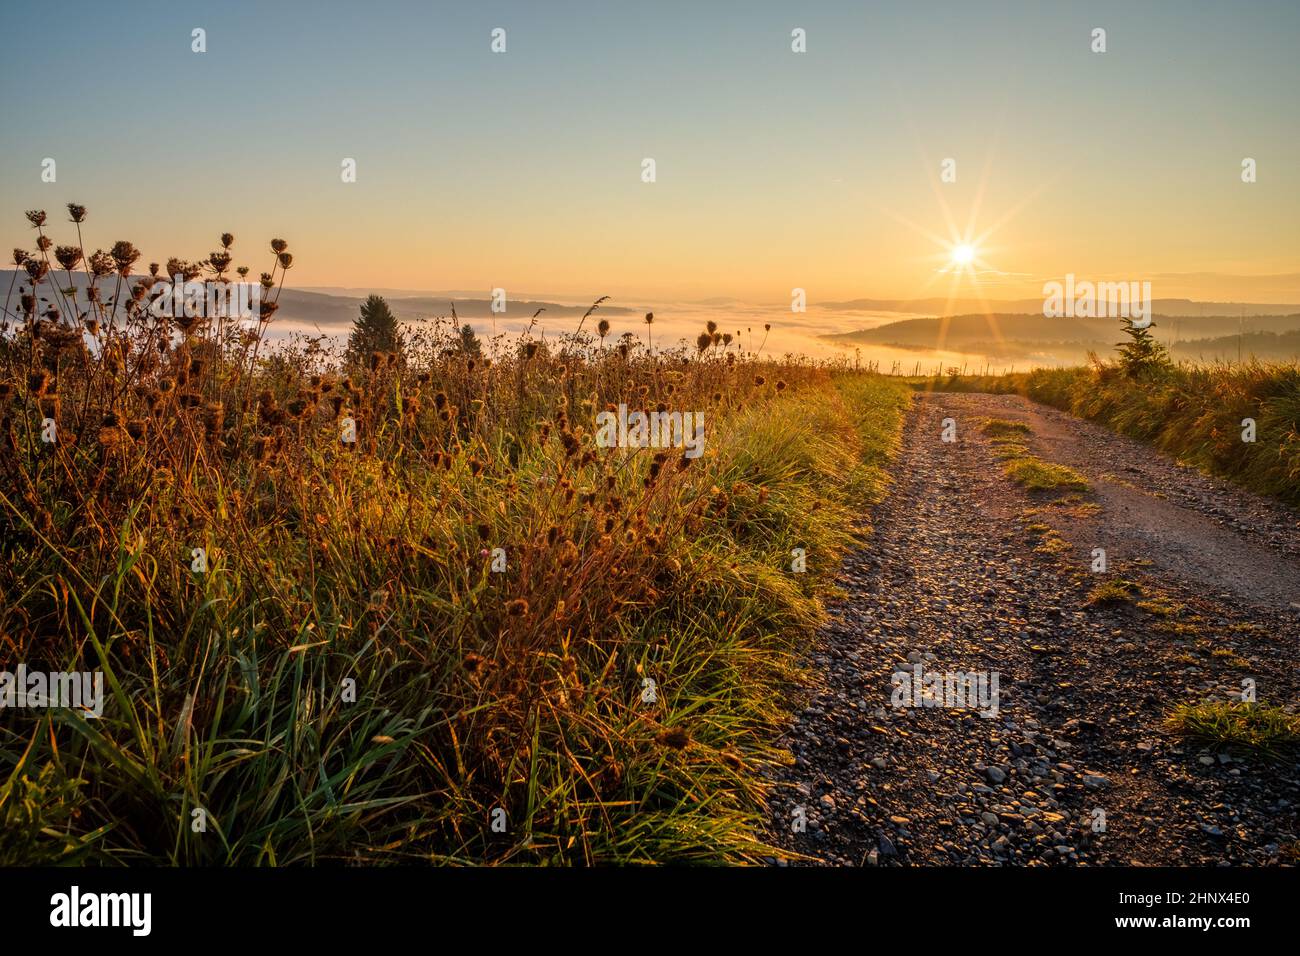 Meadow and road in foggy sunrise with sunstar landscape scene Stock Photo